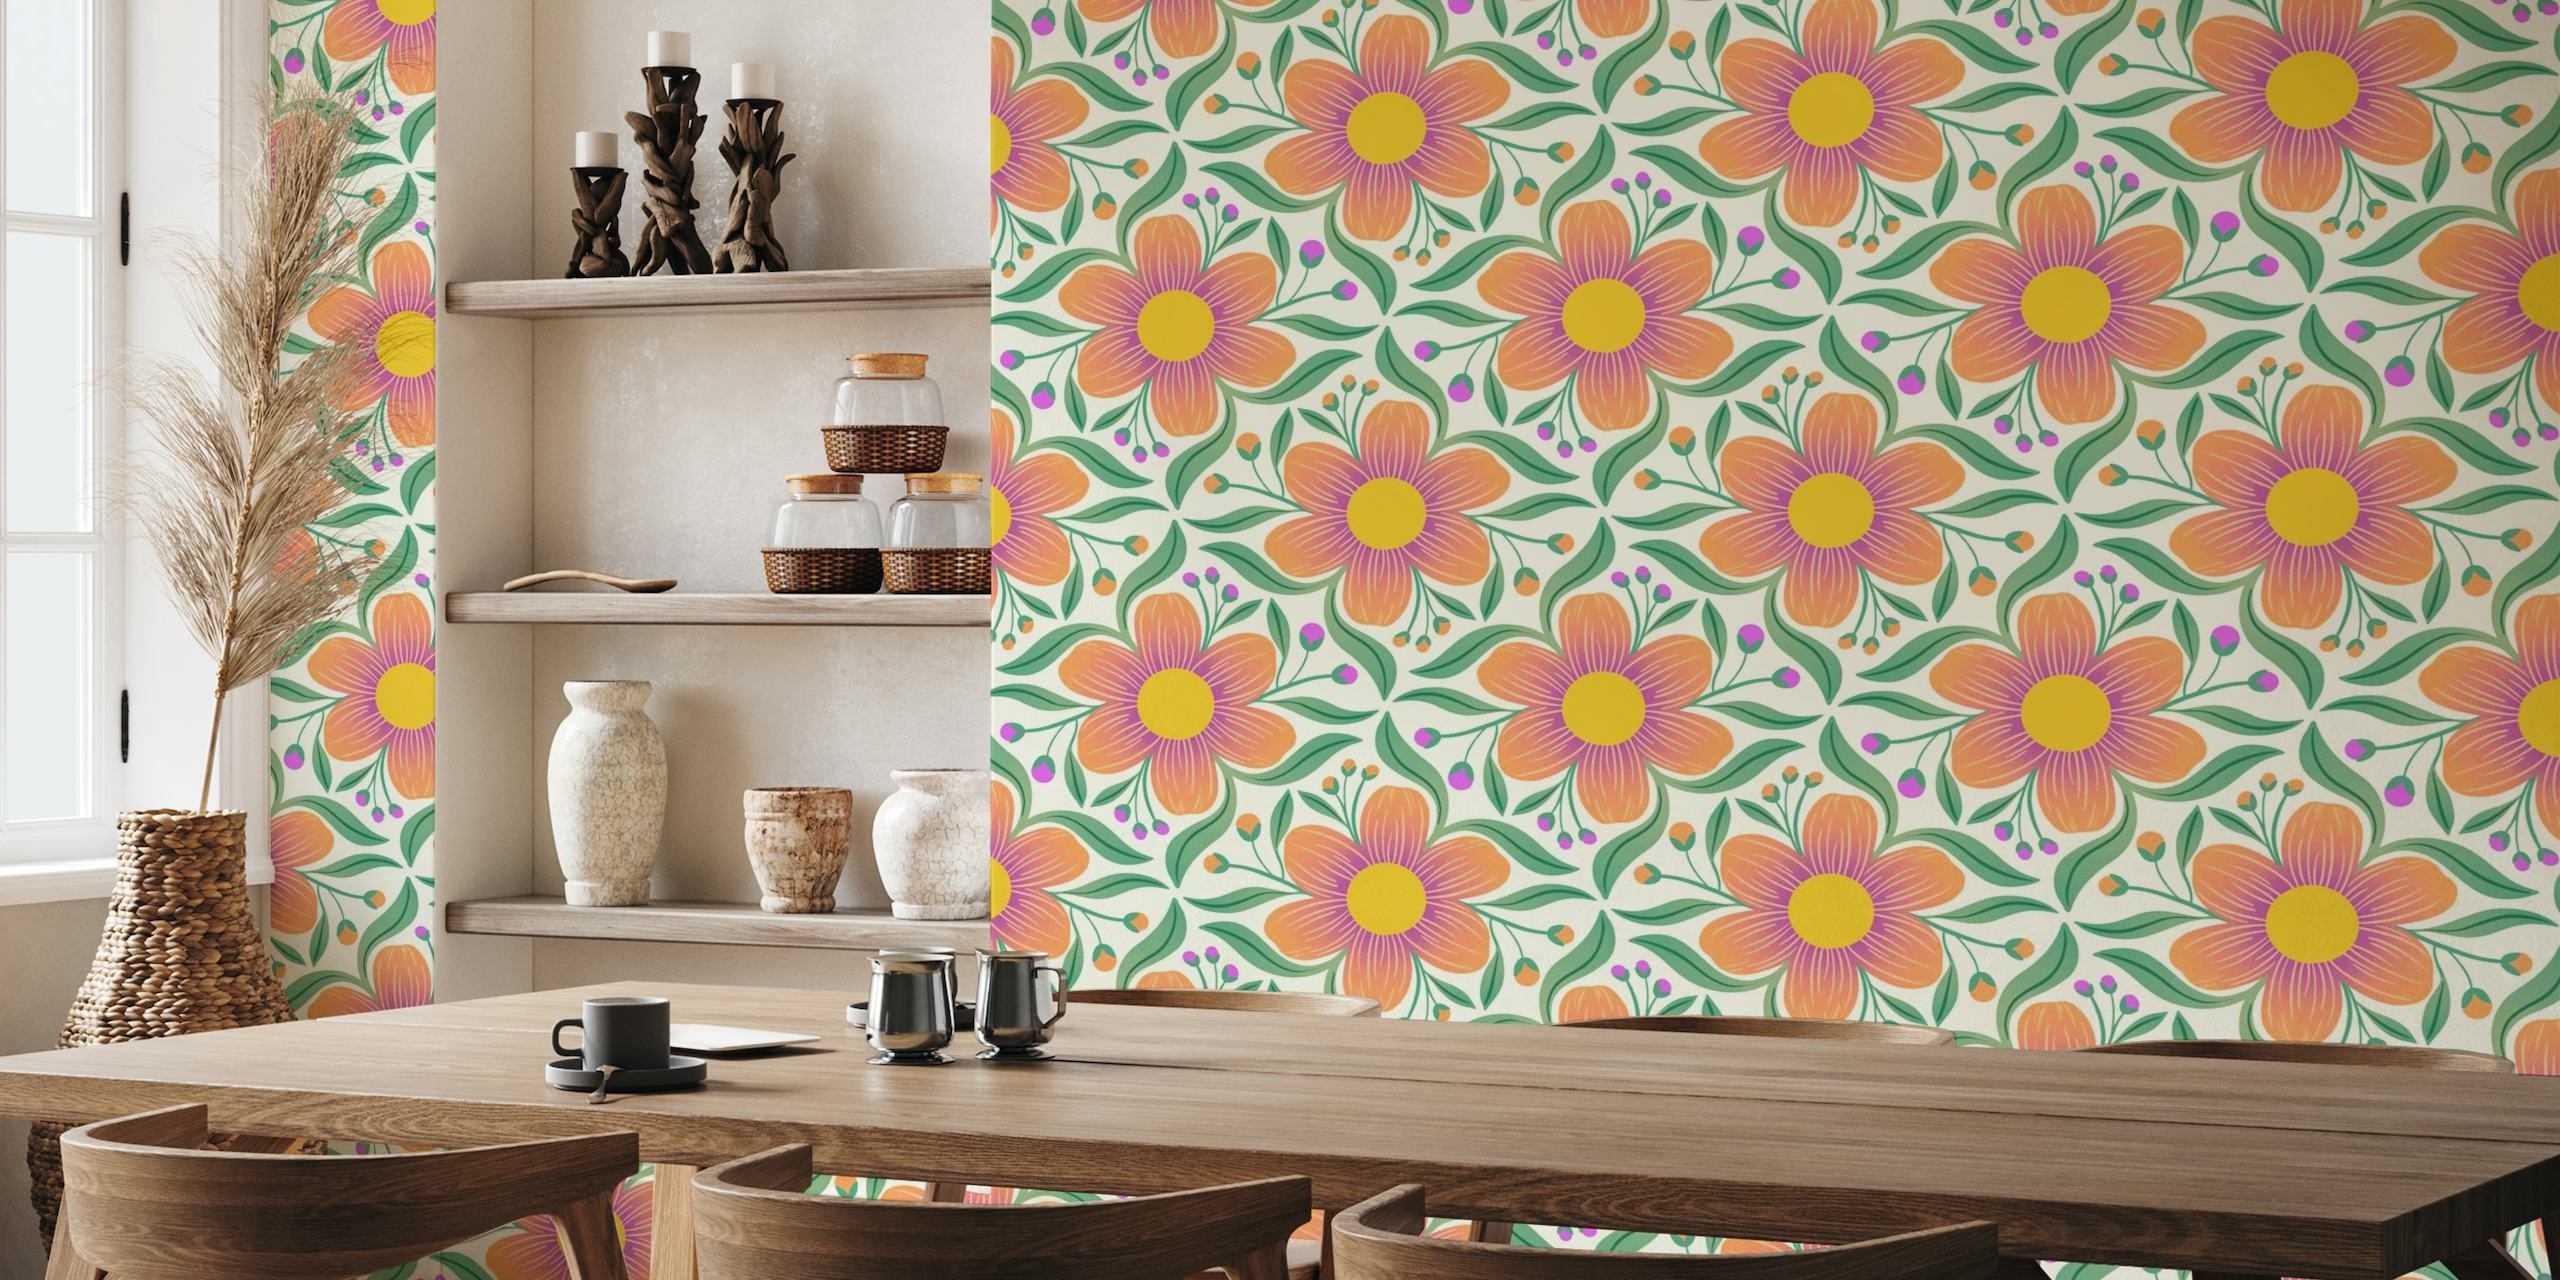 Retro-style floral pattern wall mural with oversized flowers on a light green background.